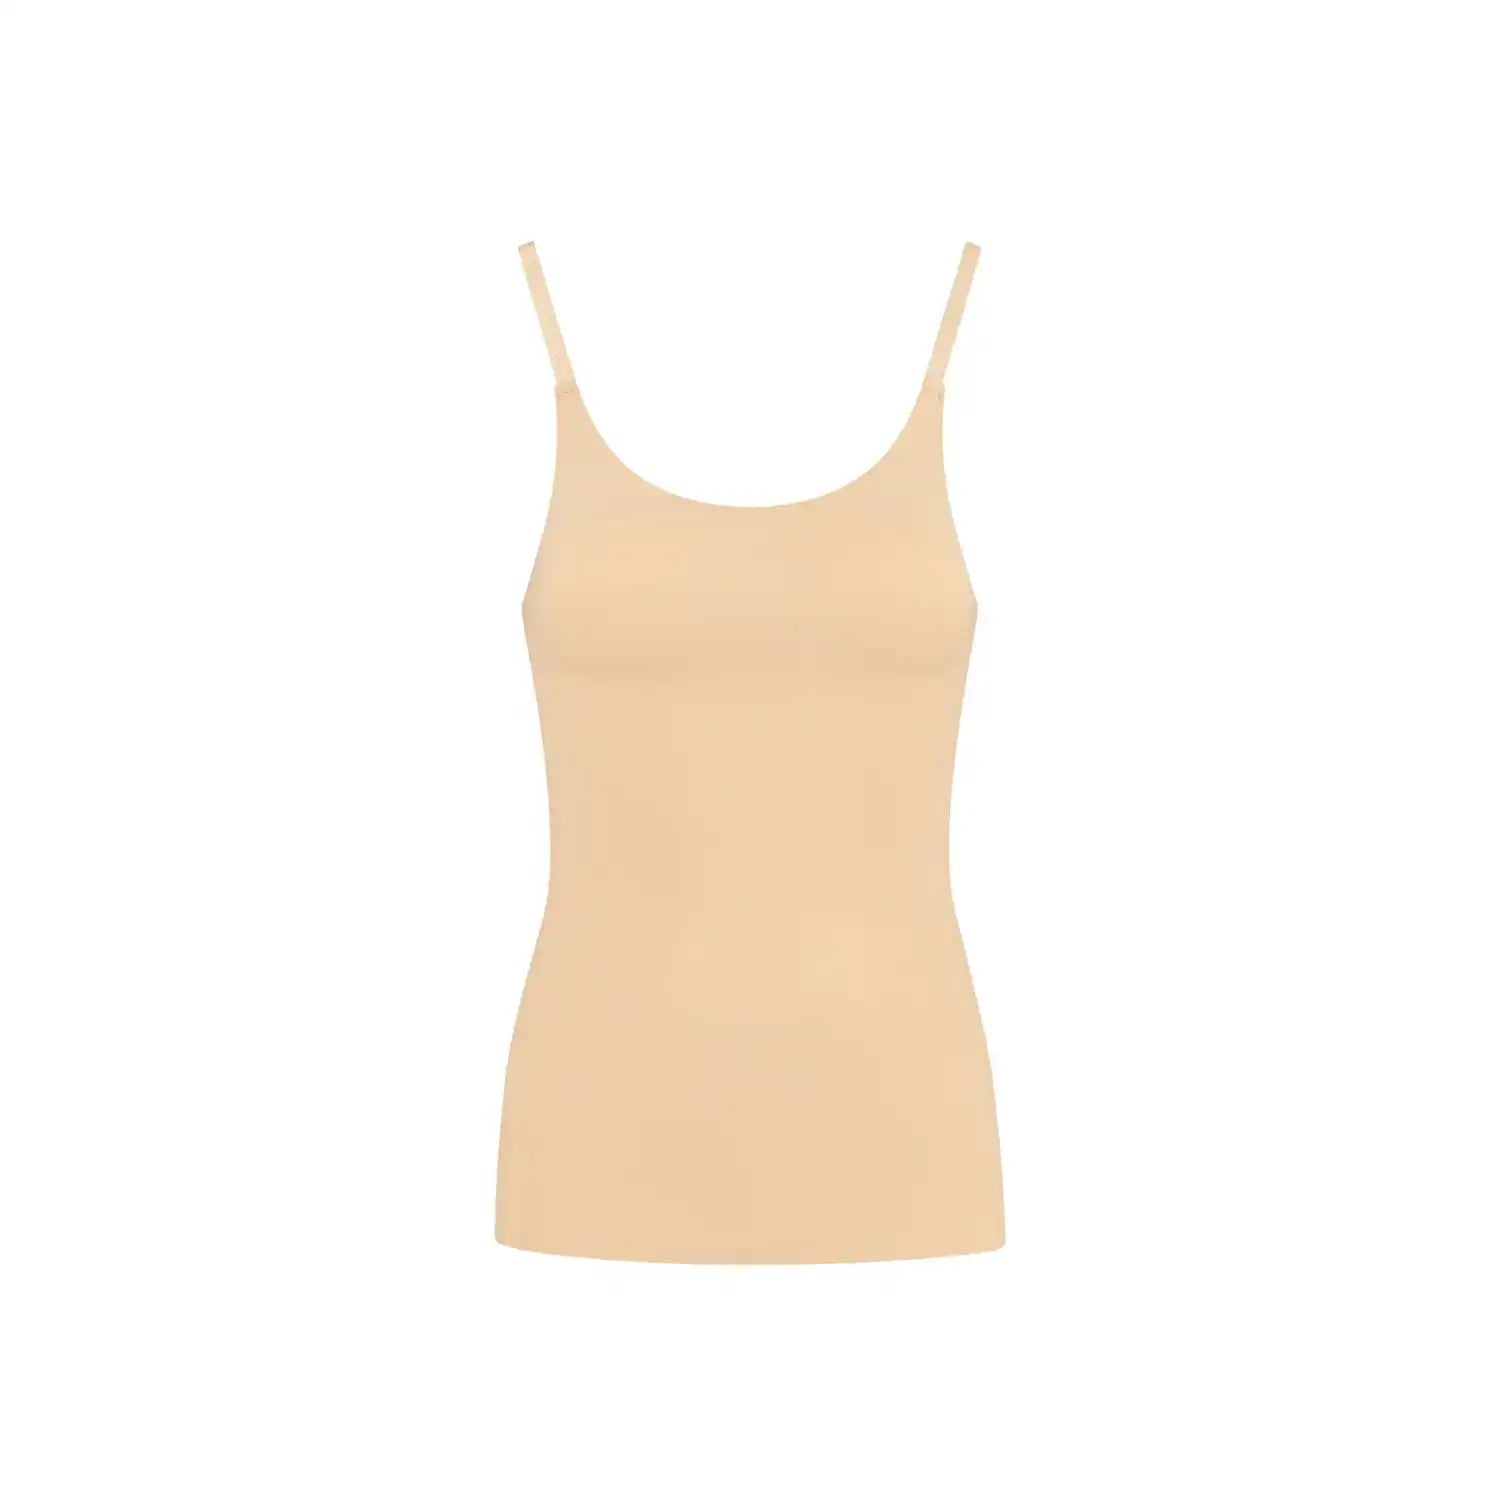 Bye Bra Invisible Singlet - Beige 1 Shaws Department Stores